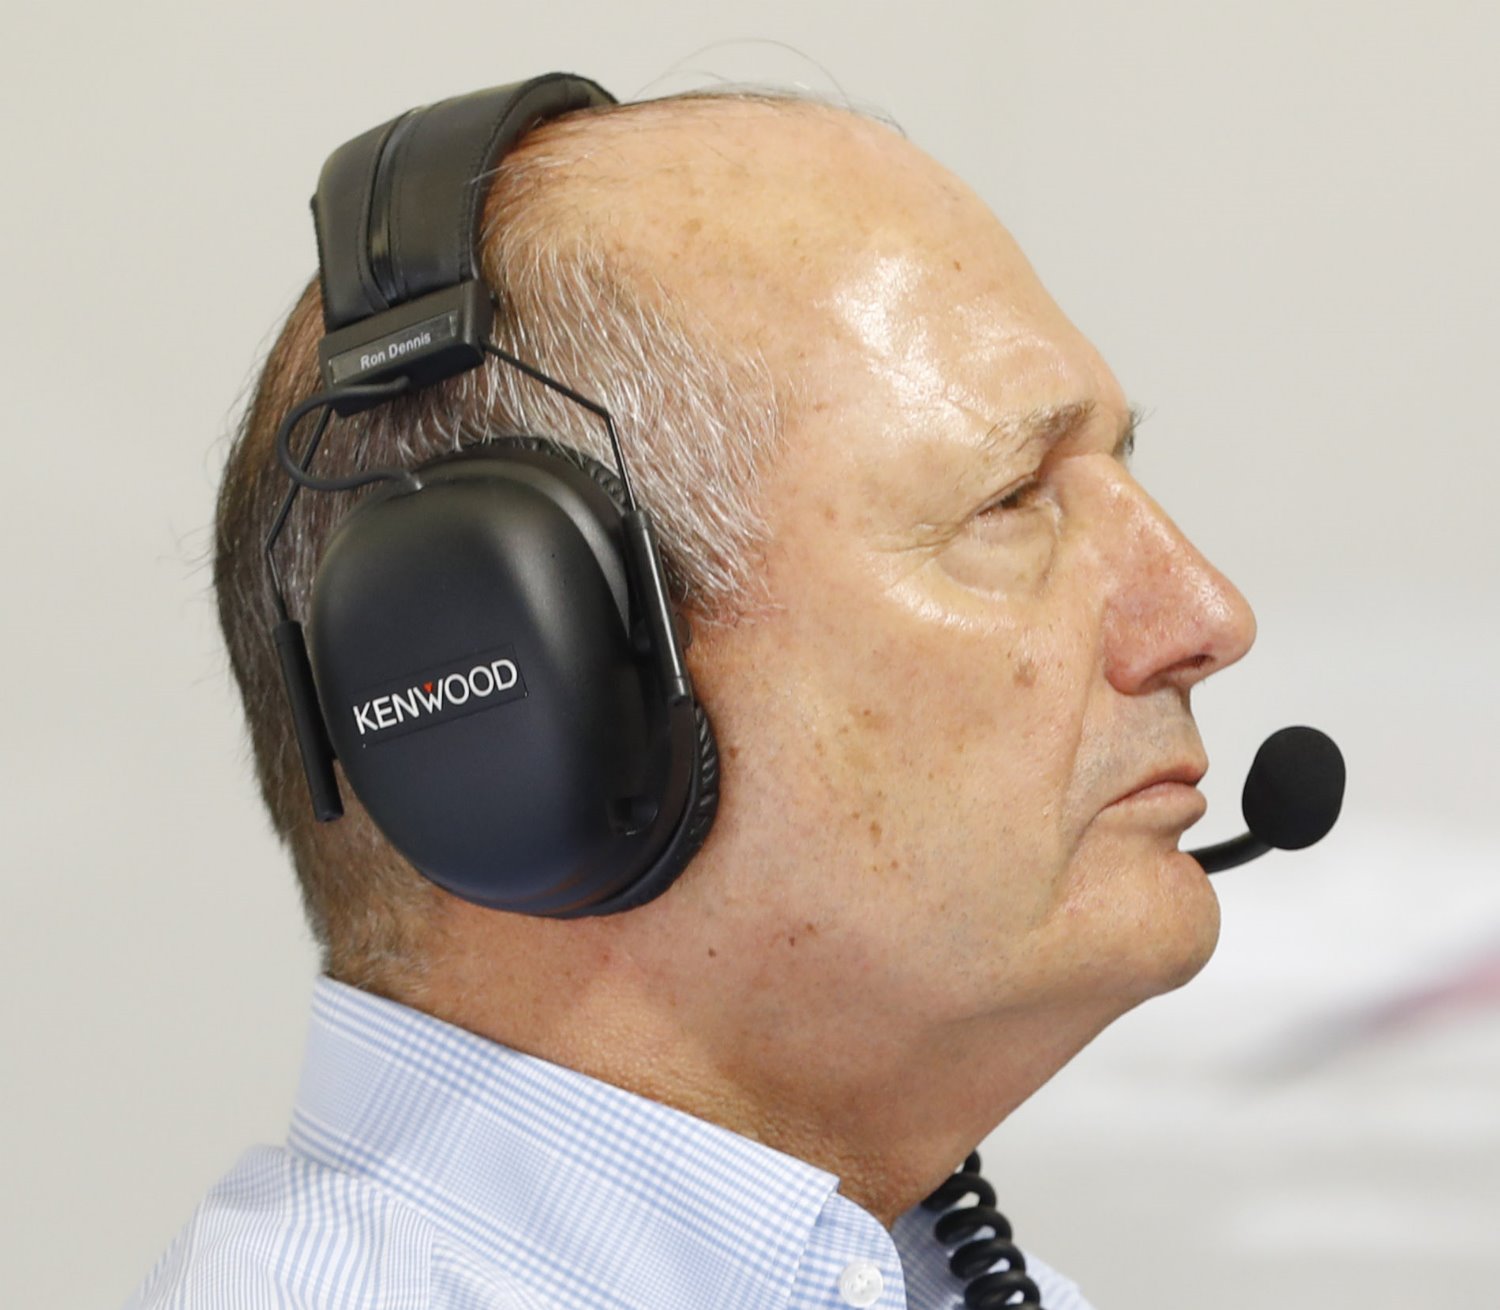 Ron Dennis - we hear his plot of land has a pasture. He's been put to pasture.